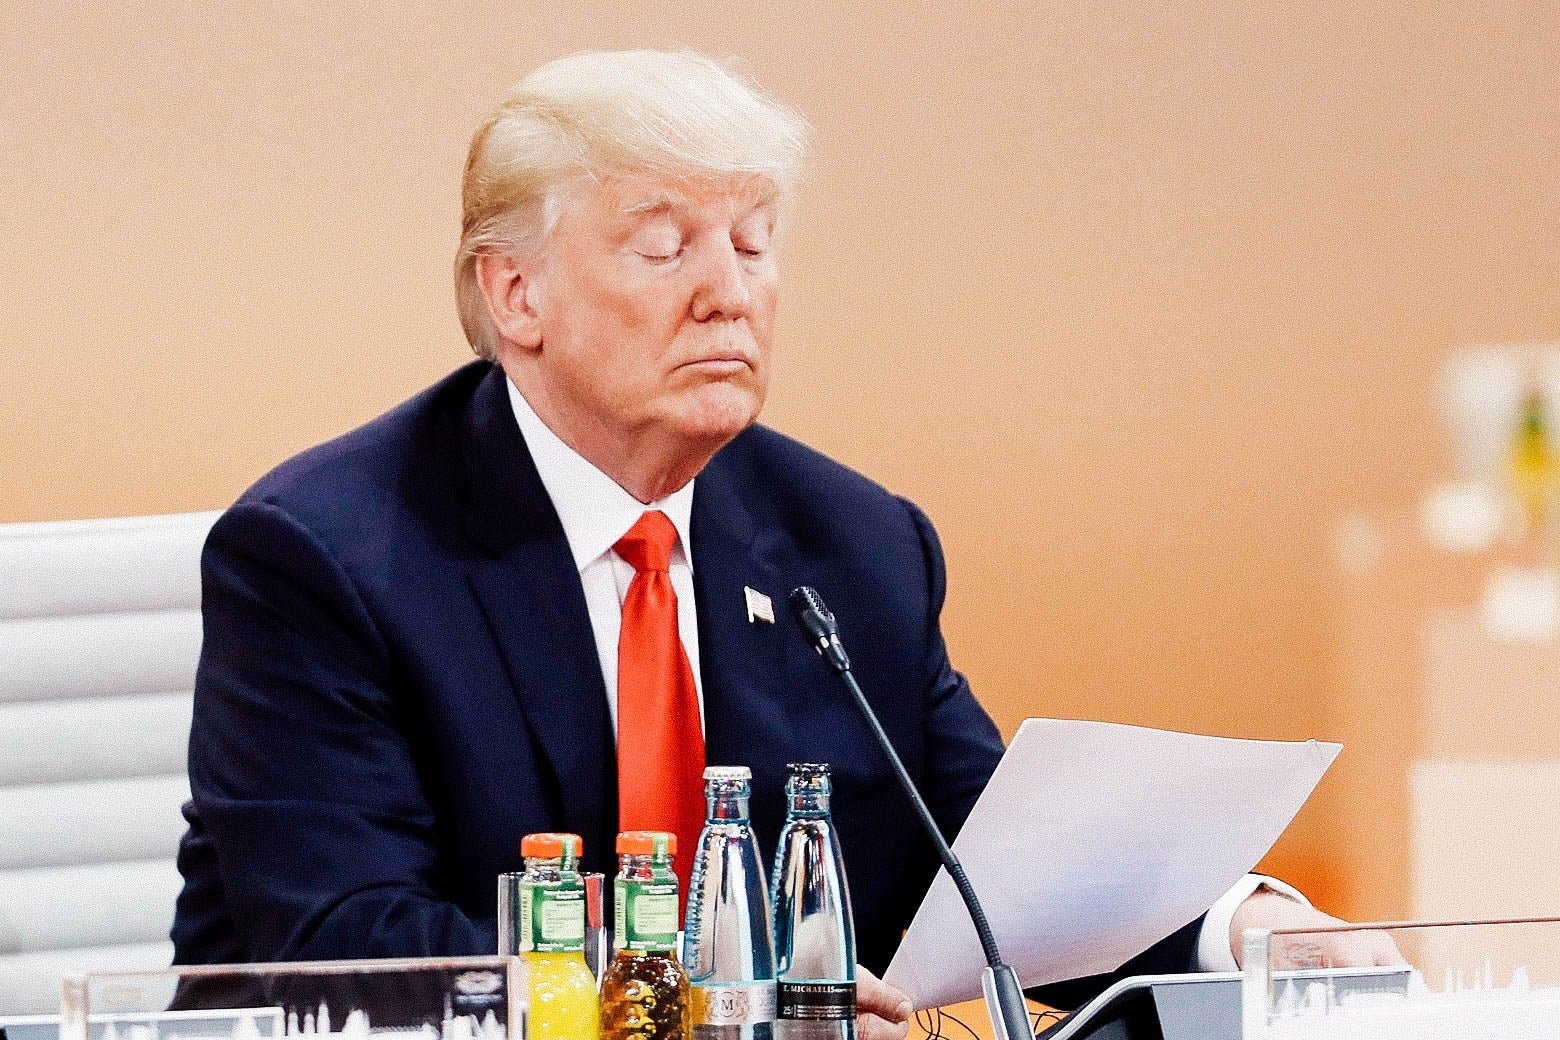 President Donald Trump reads a document on the second day of the G20 economic summit on July 8, 2017 in Hamburg, Germany.